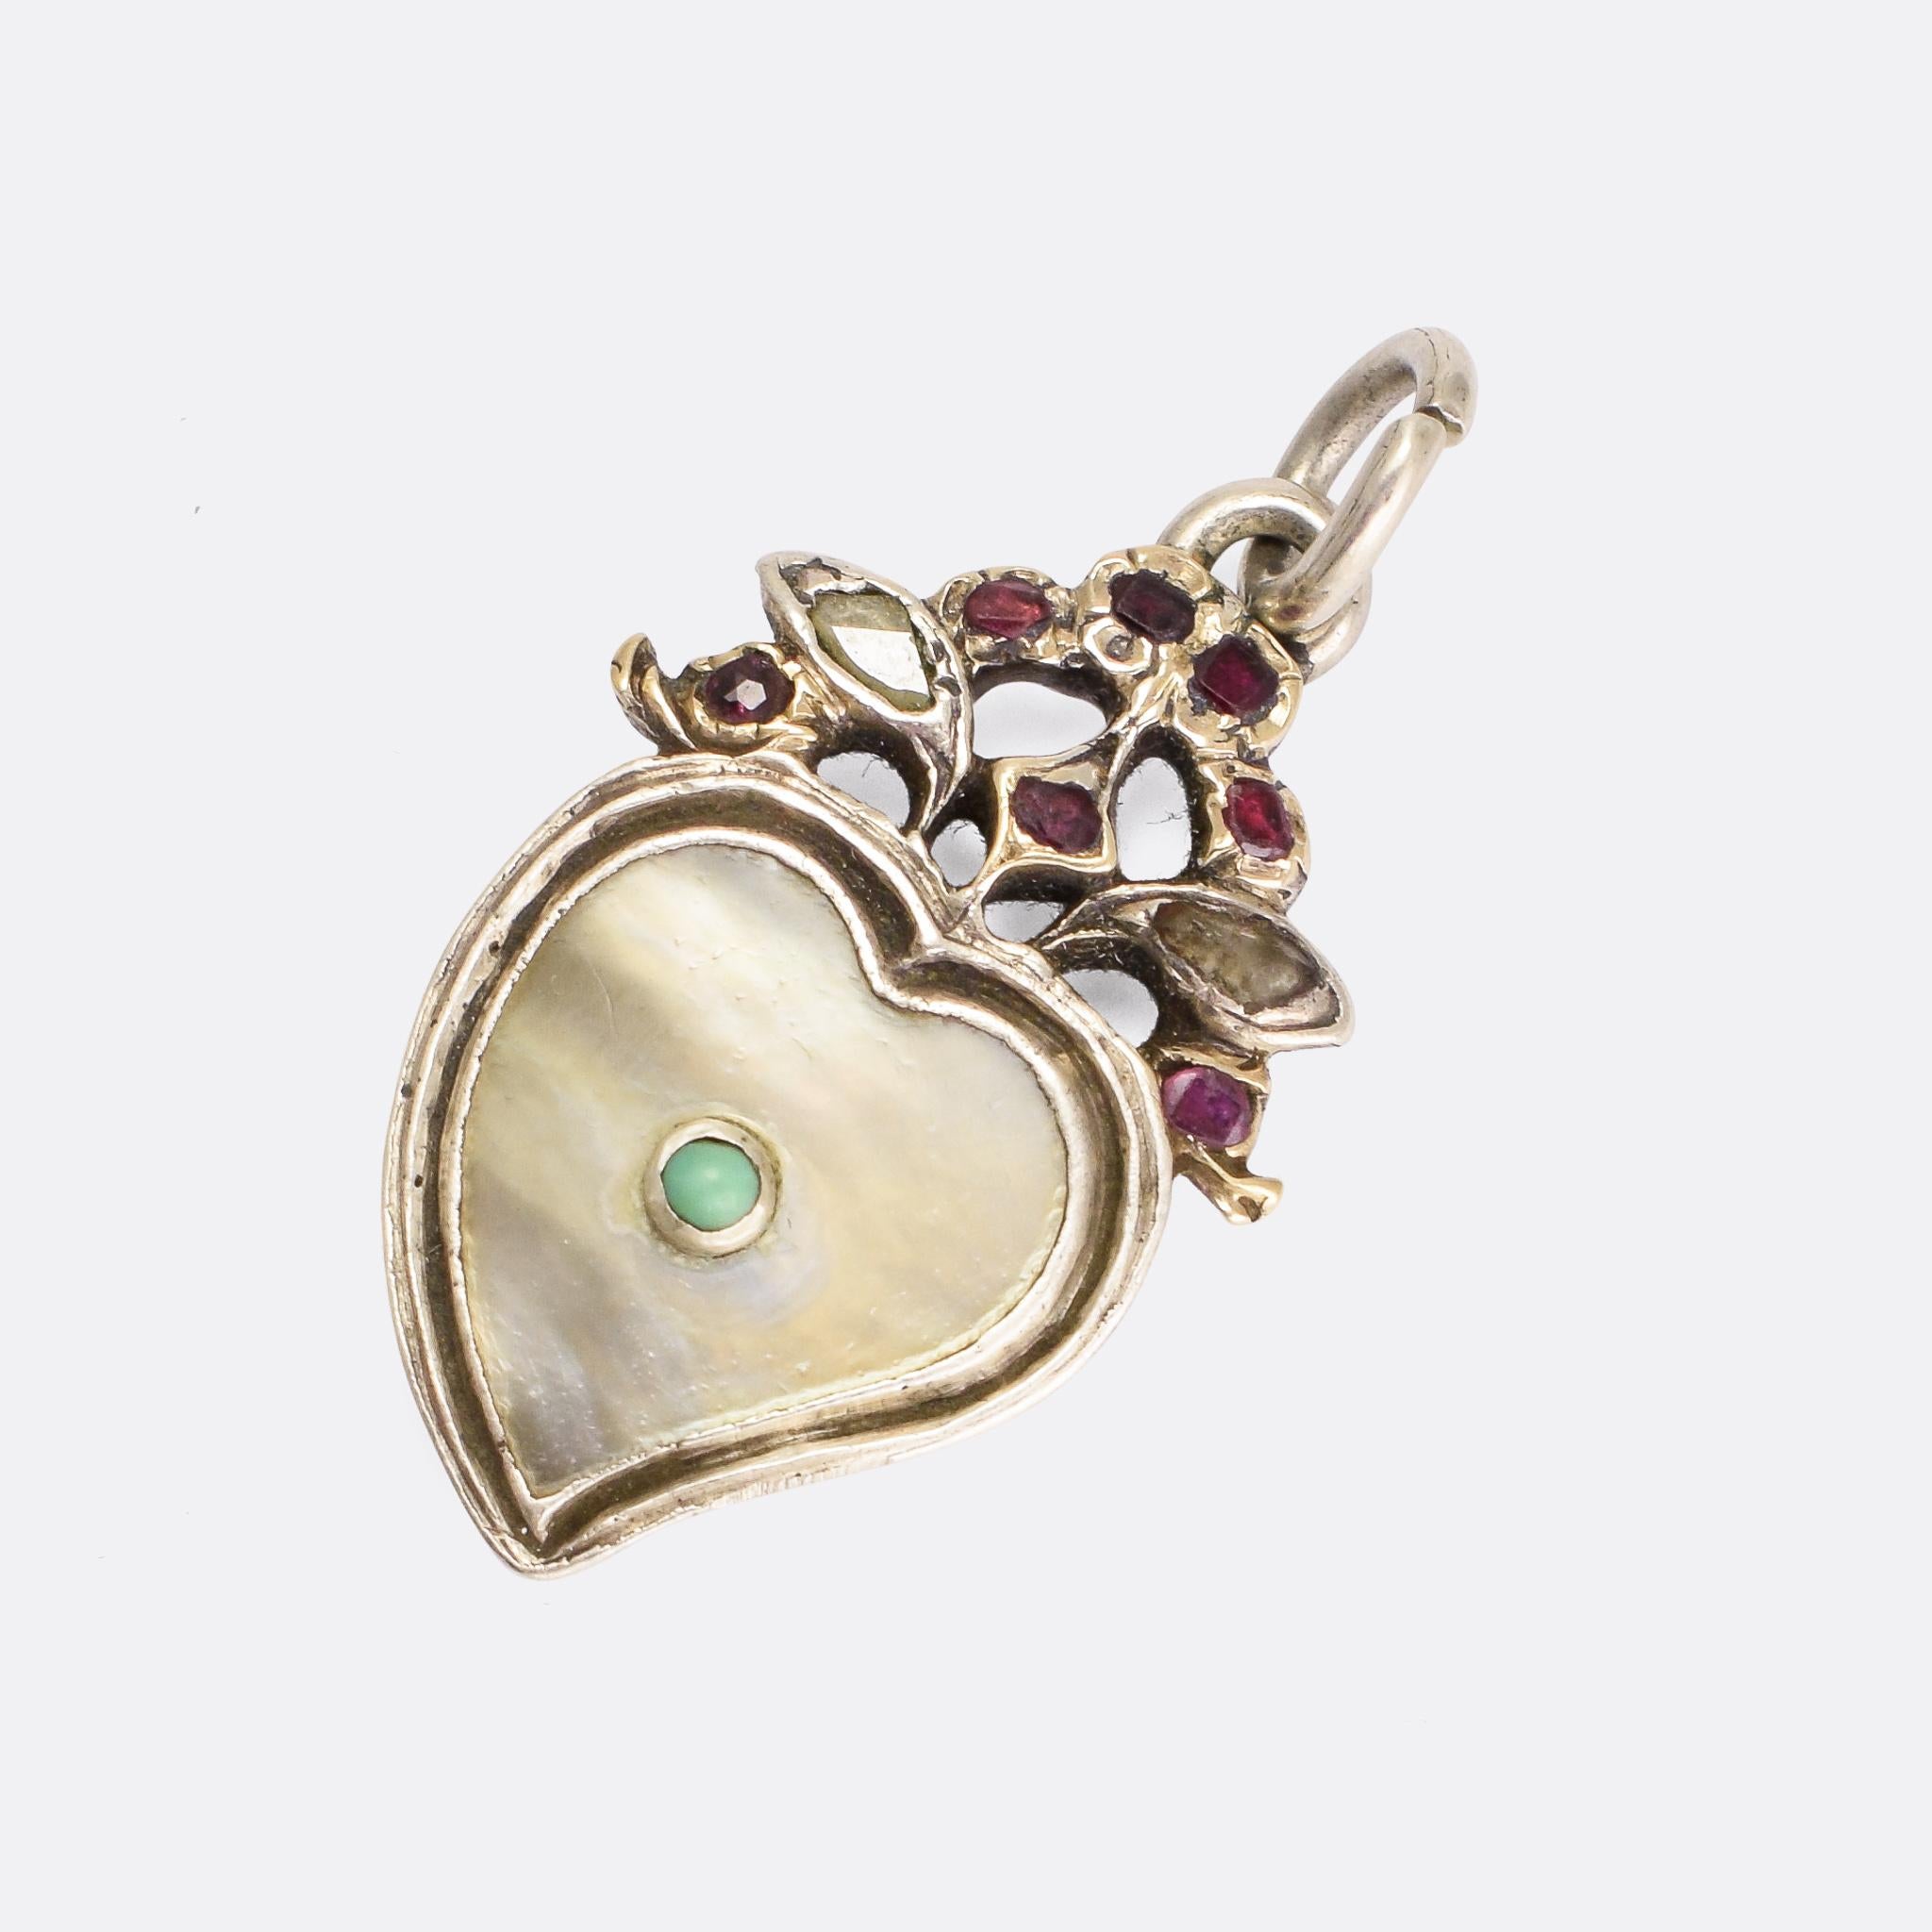 A sweet 18th Century Witches Heart Pendant dating from circa 1780. A turquoise cabochon sits within heart-shaped mother of pearl centrepiece, while the frame above is set with diamond and garnet Giardinetti motifs. The execution is excellent, in